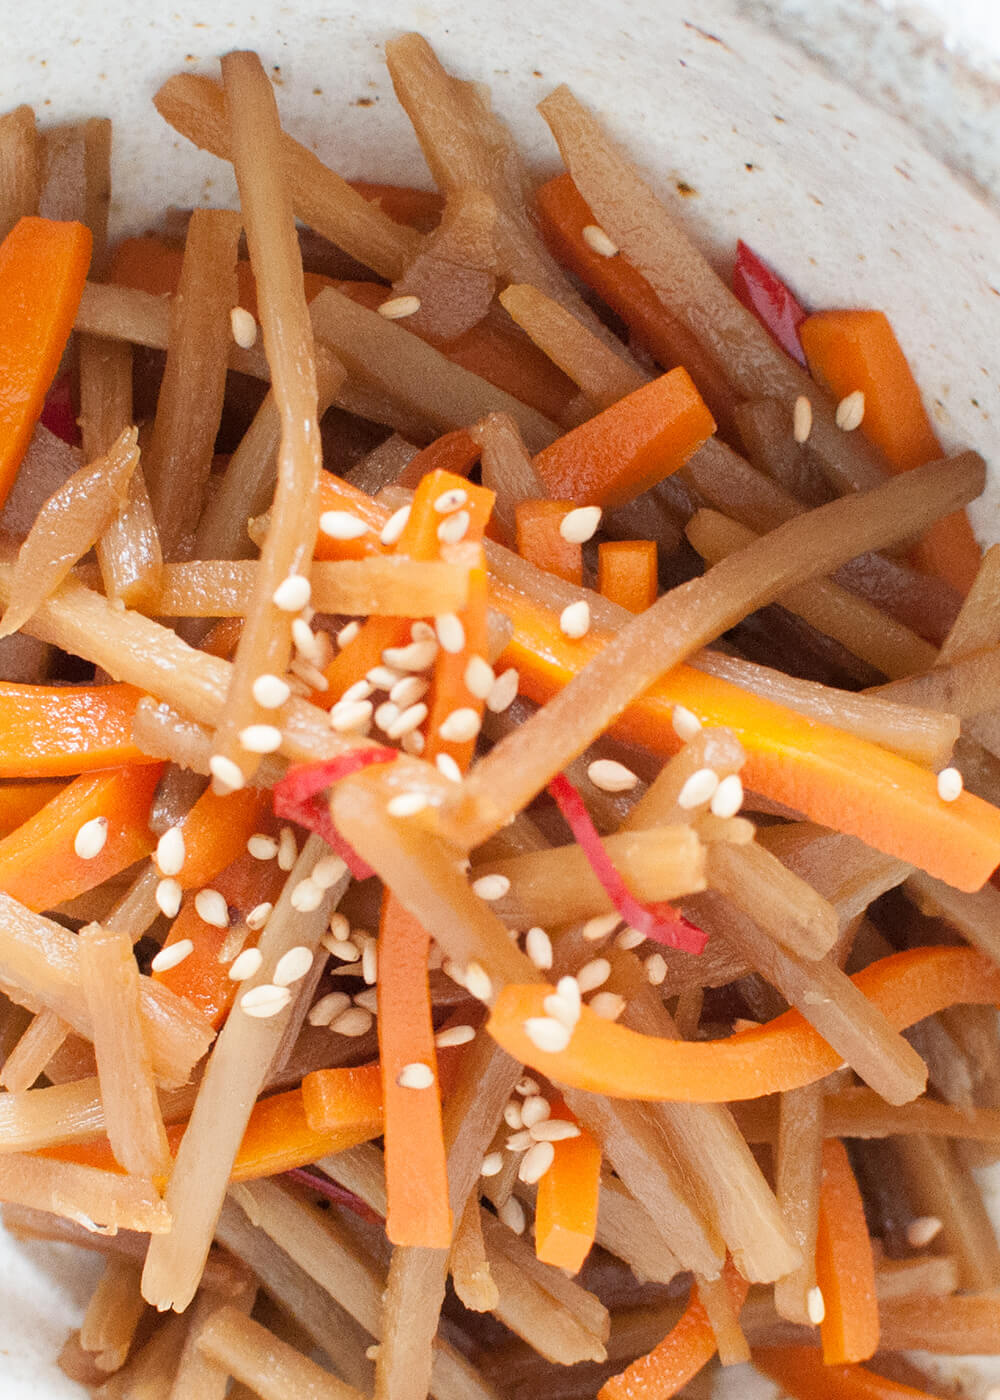 A typical Japanese home cooking dish, Braised Burdock (Kinpira Gobō) is a vegetable side dish. Burdock root and carrot are cut into matchsticks and cooked in a slightly sweet soy sauce. It is very fast to make and can be made ahead of time.